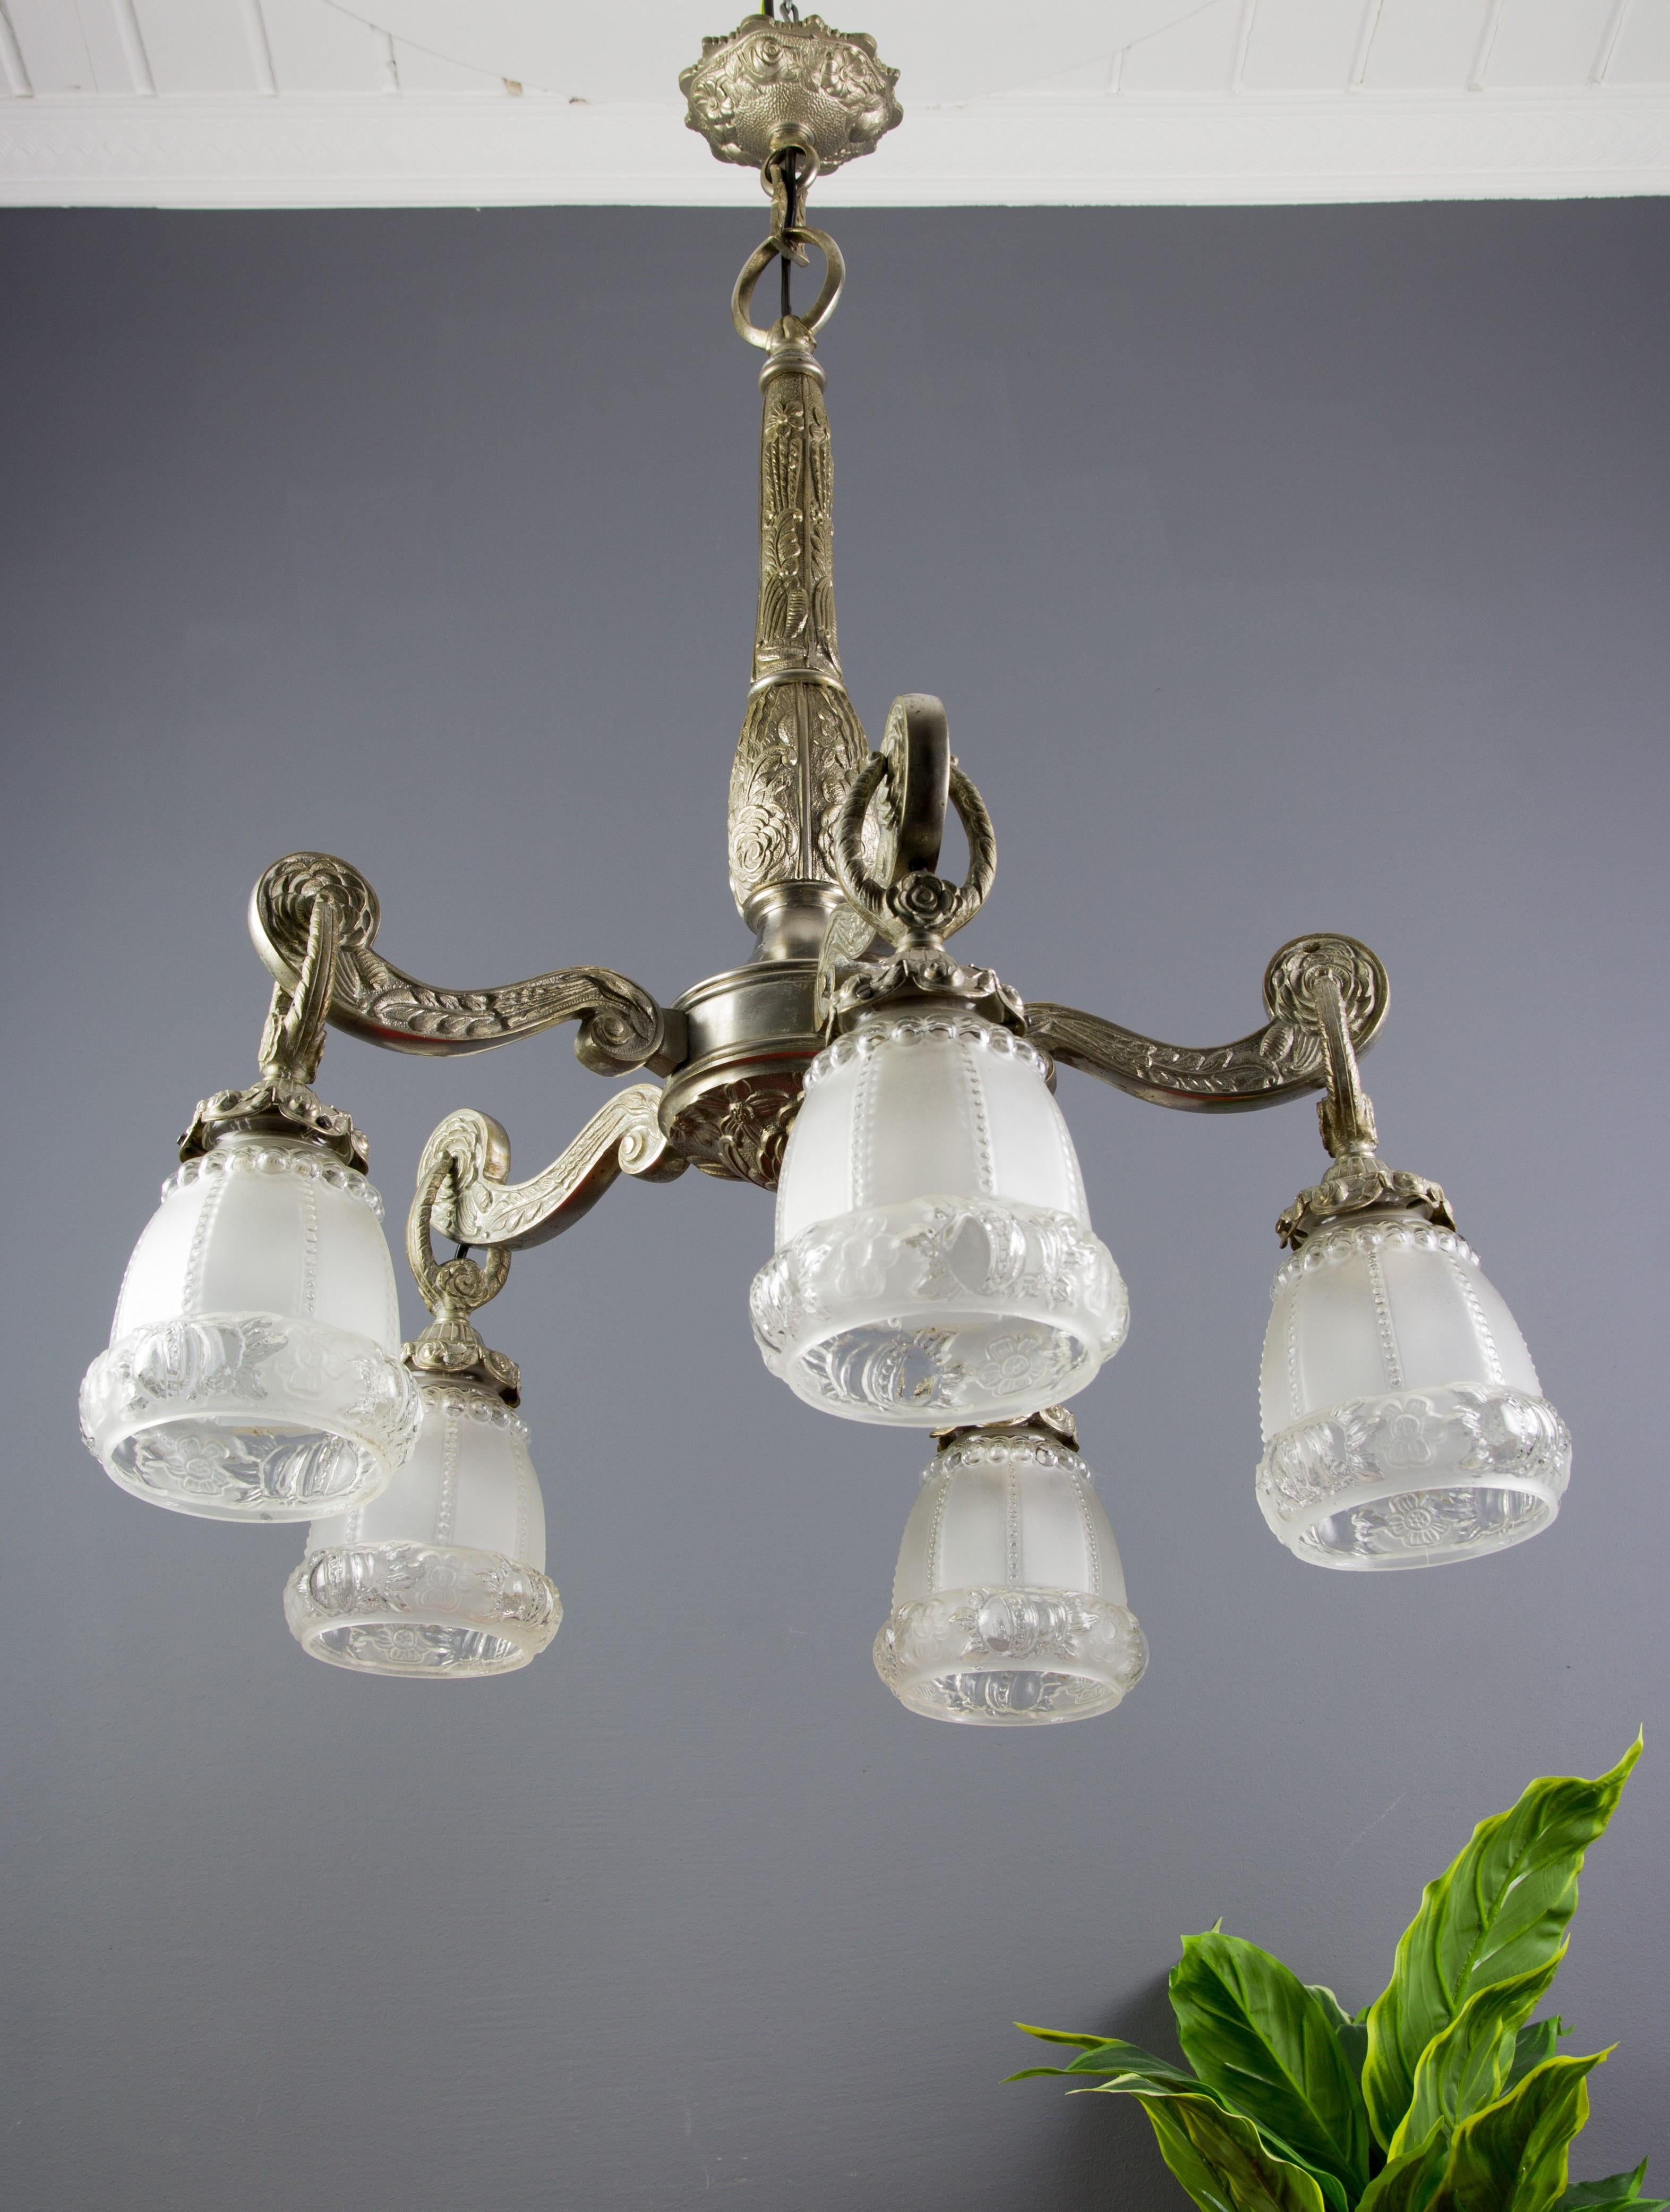 Beautiful Art Deco style bronze chandelier with floral and foliate motifs on arms, stem, and canopy. Five bronze arms, each with frosted floral glass shade and a socket for the E 27 (E26) size light bulb. France, 1930s. 
Dimensions: 
Diameter (with